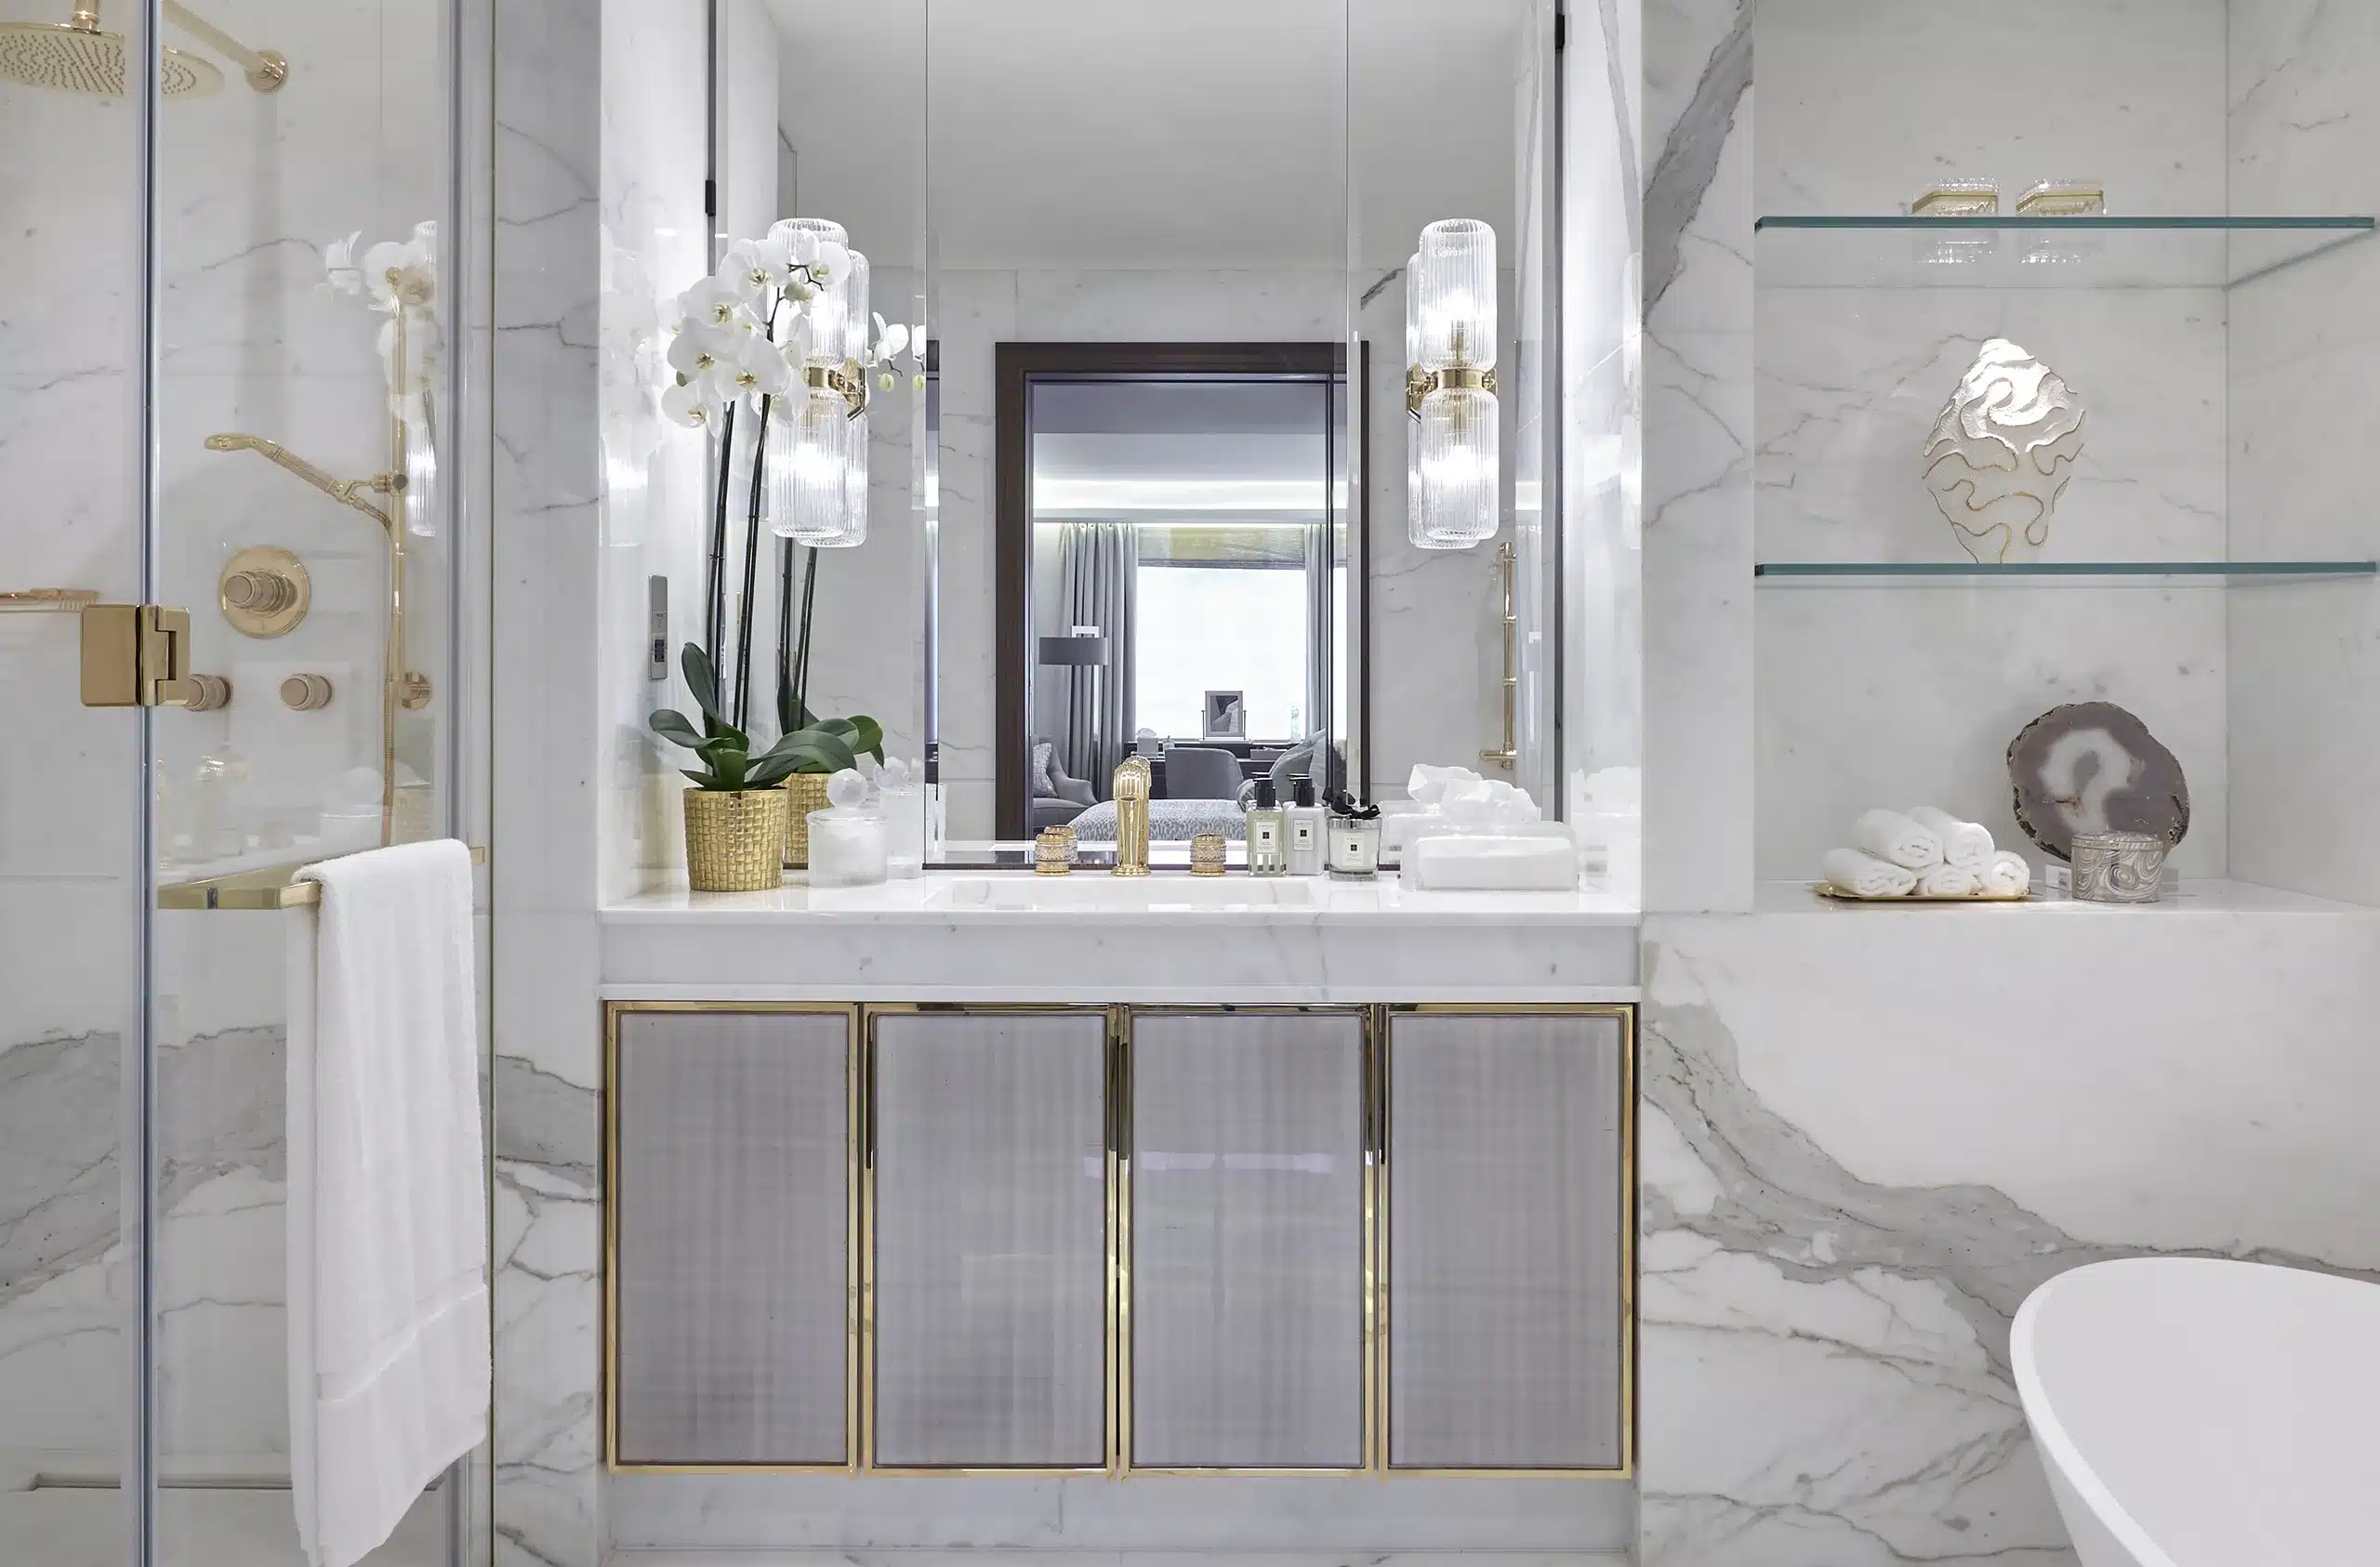 A bathroom with light marble in a hyde park townhouse in central london